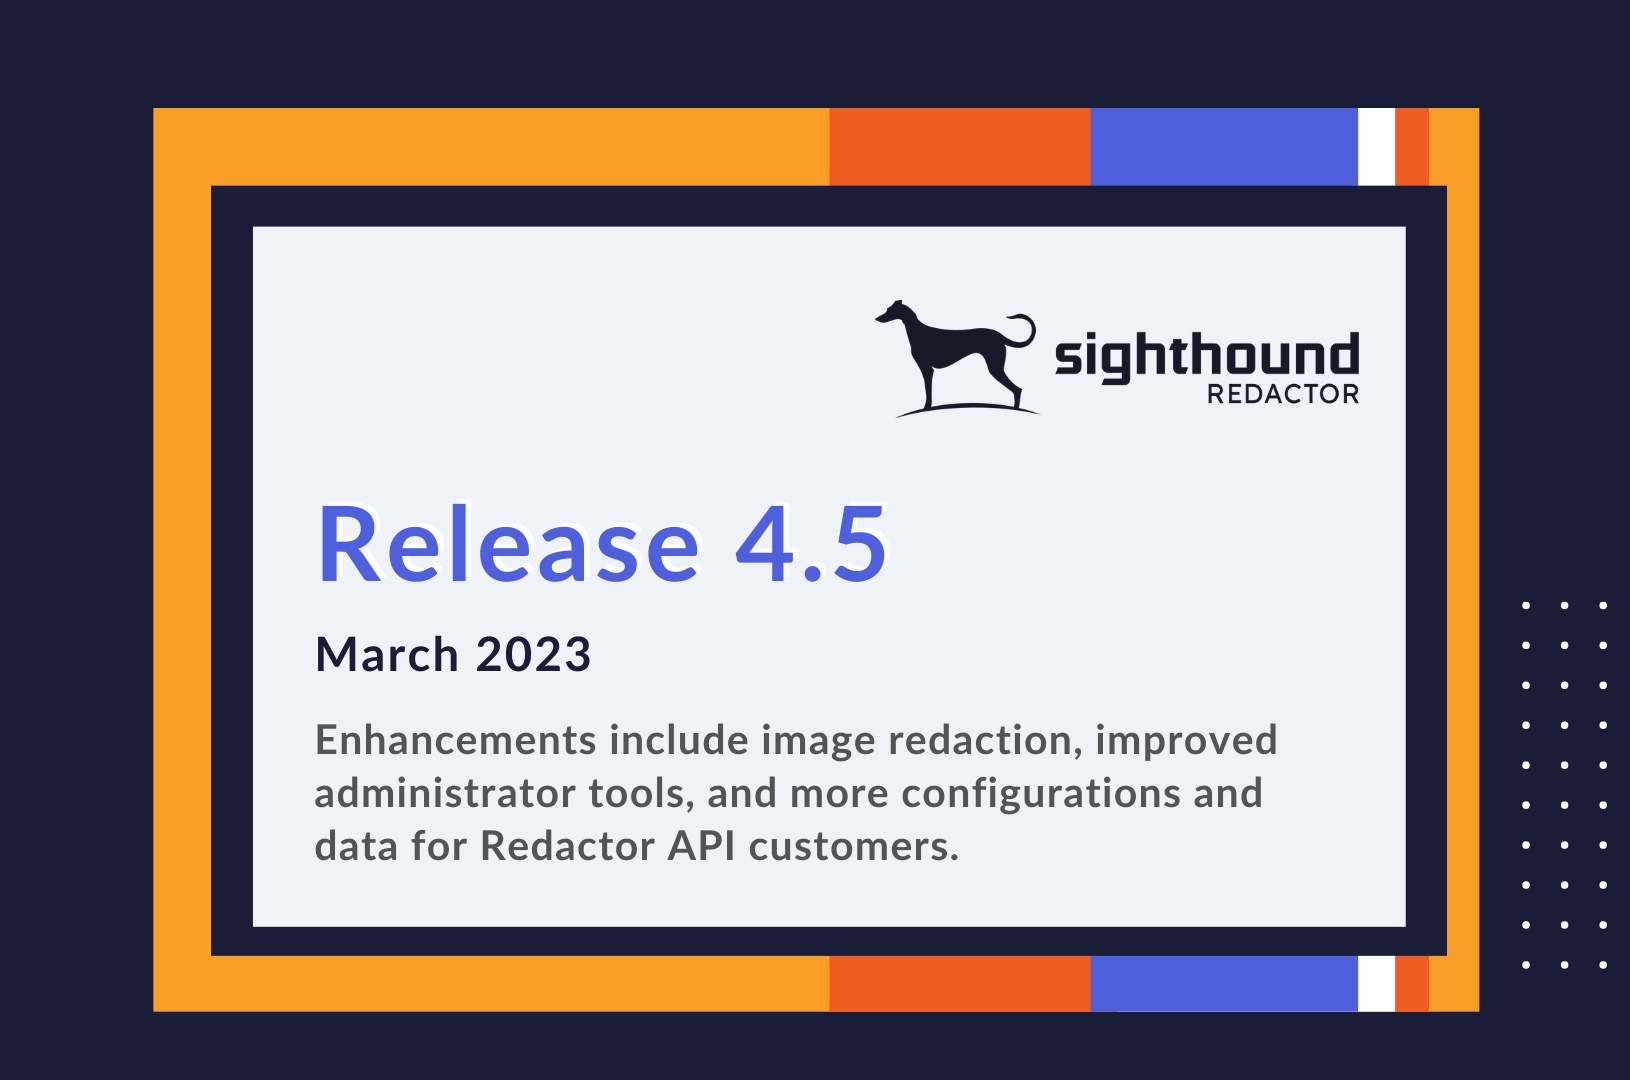 Latest Release of Sighthound Redactor Brings Big Value 